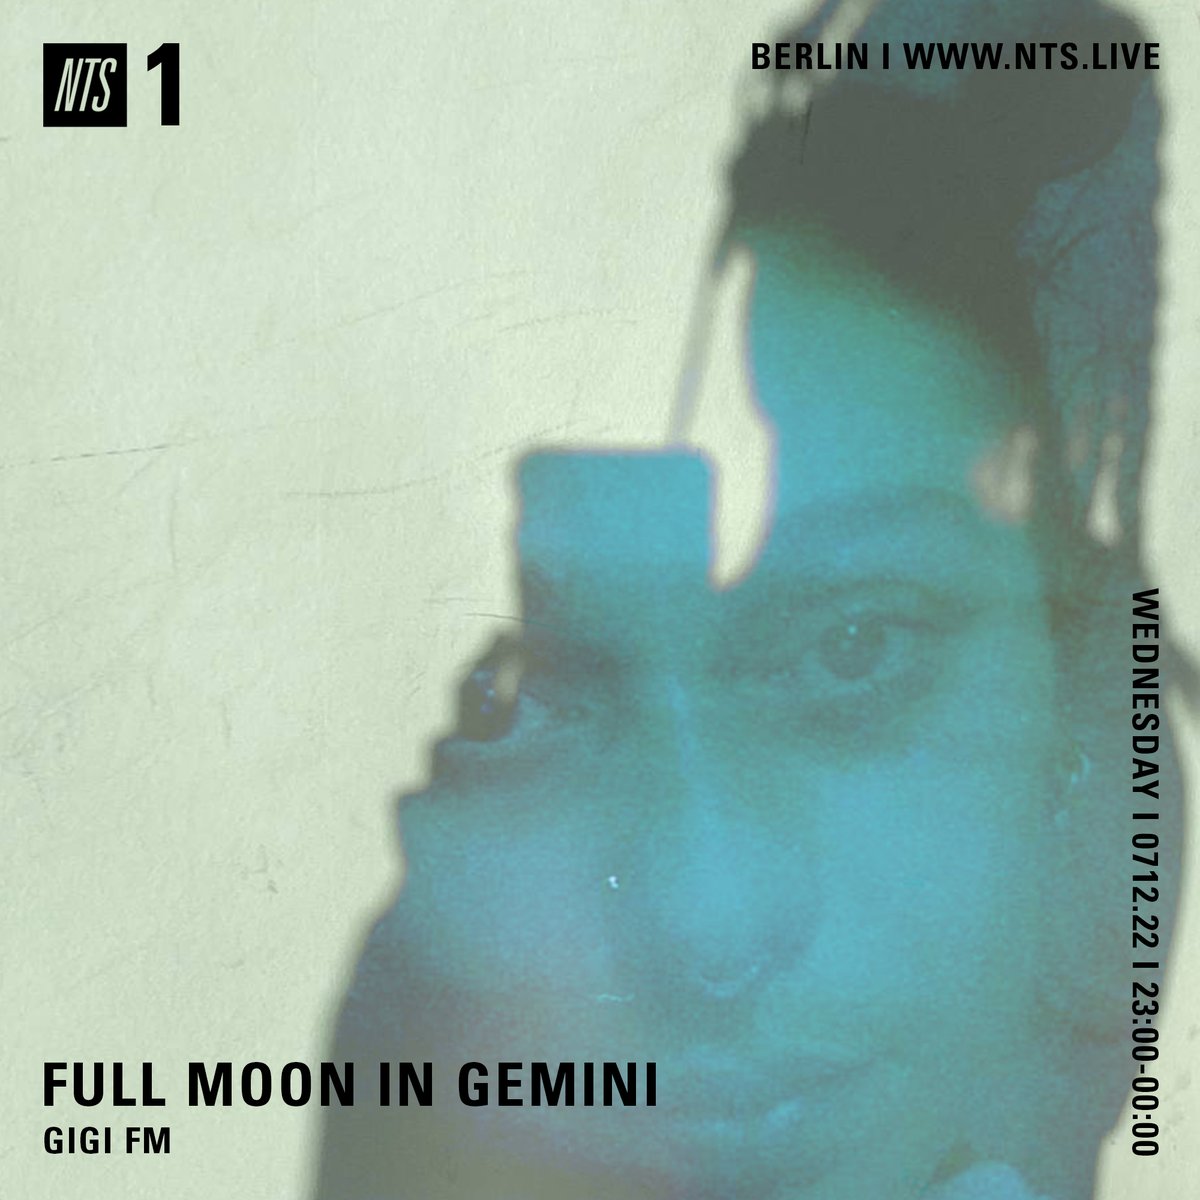 .@GiGiFM3 presents the sounds of a Full Moon In Gemini - live now at nts.live/1